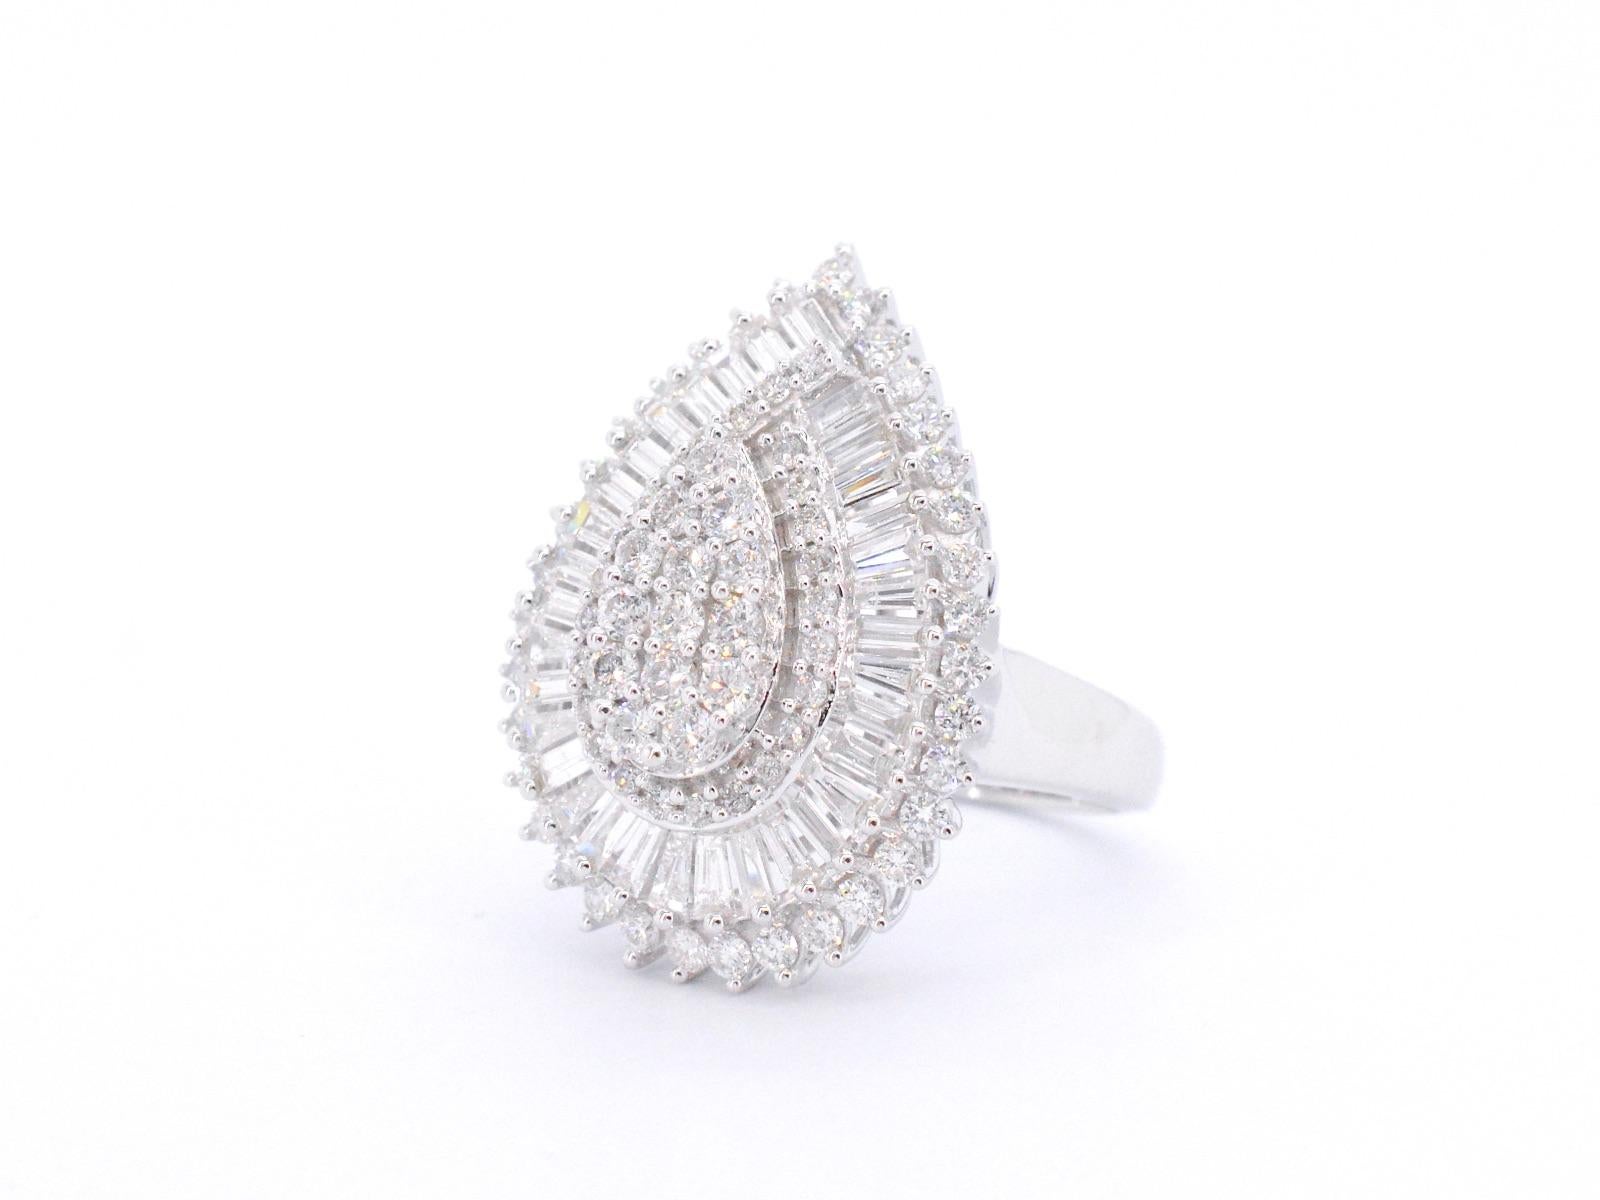 This exclusive white gold ring is a true statement piece, featuring a stunning drop-shaped entourage setting with a dazzling display of 2.75 carats of brilliant and baguette cut diamonds. The diamonds are expertly arranged to create a breathtaking